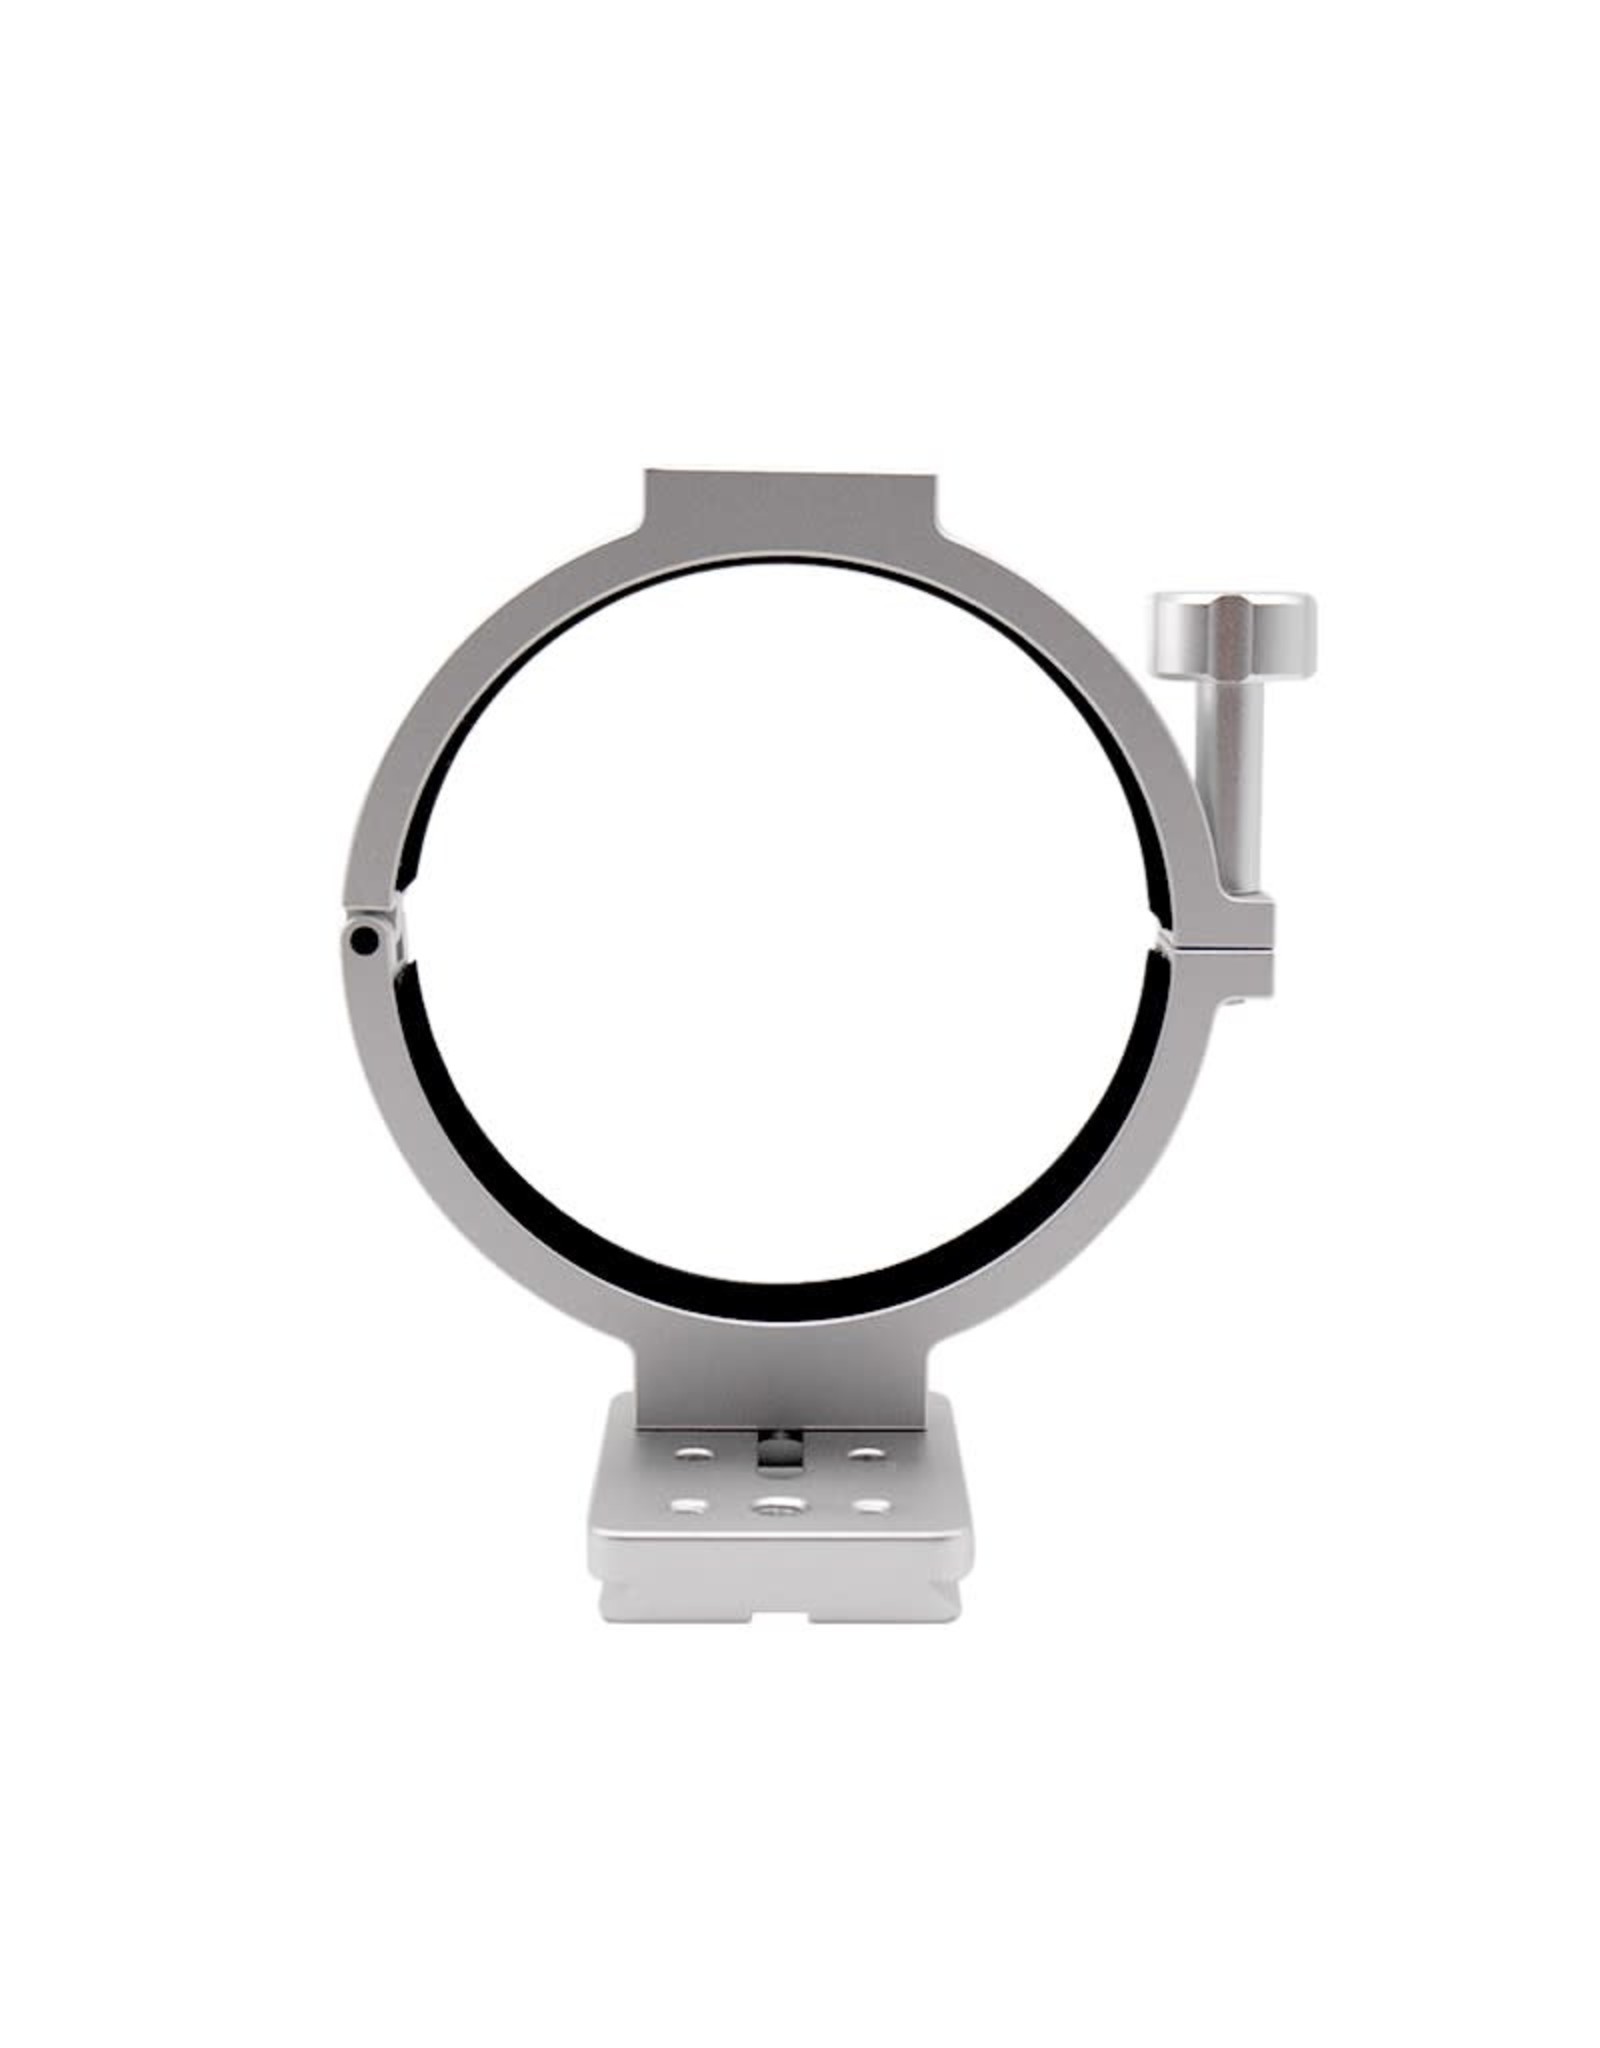 ZWO ZWO D90 Holder Ring for ASI Cooled Cameras (90mm Diameter)